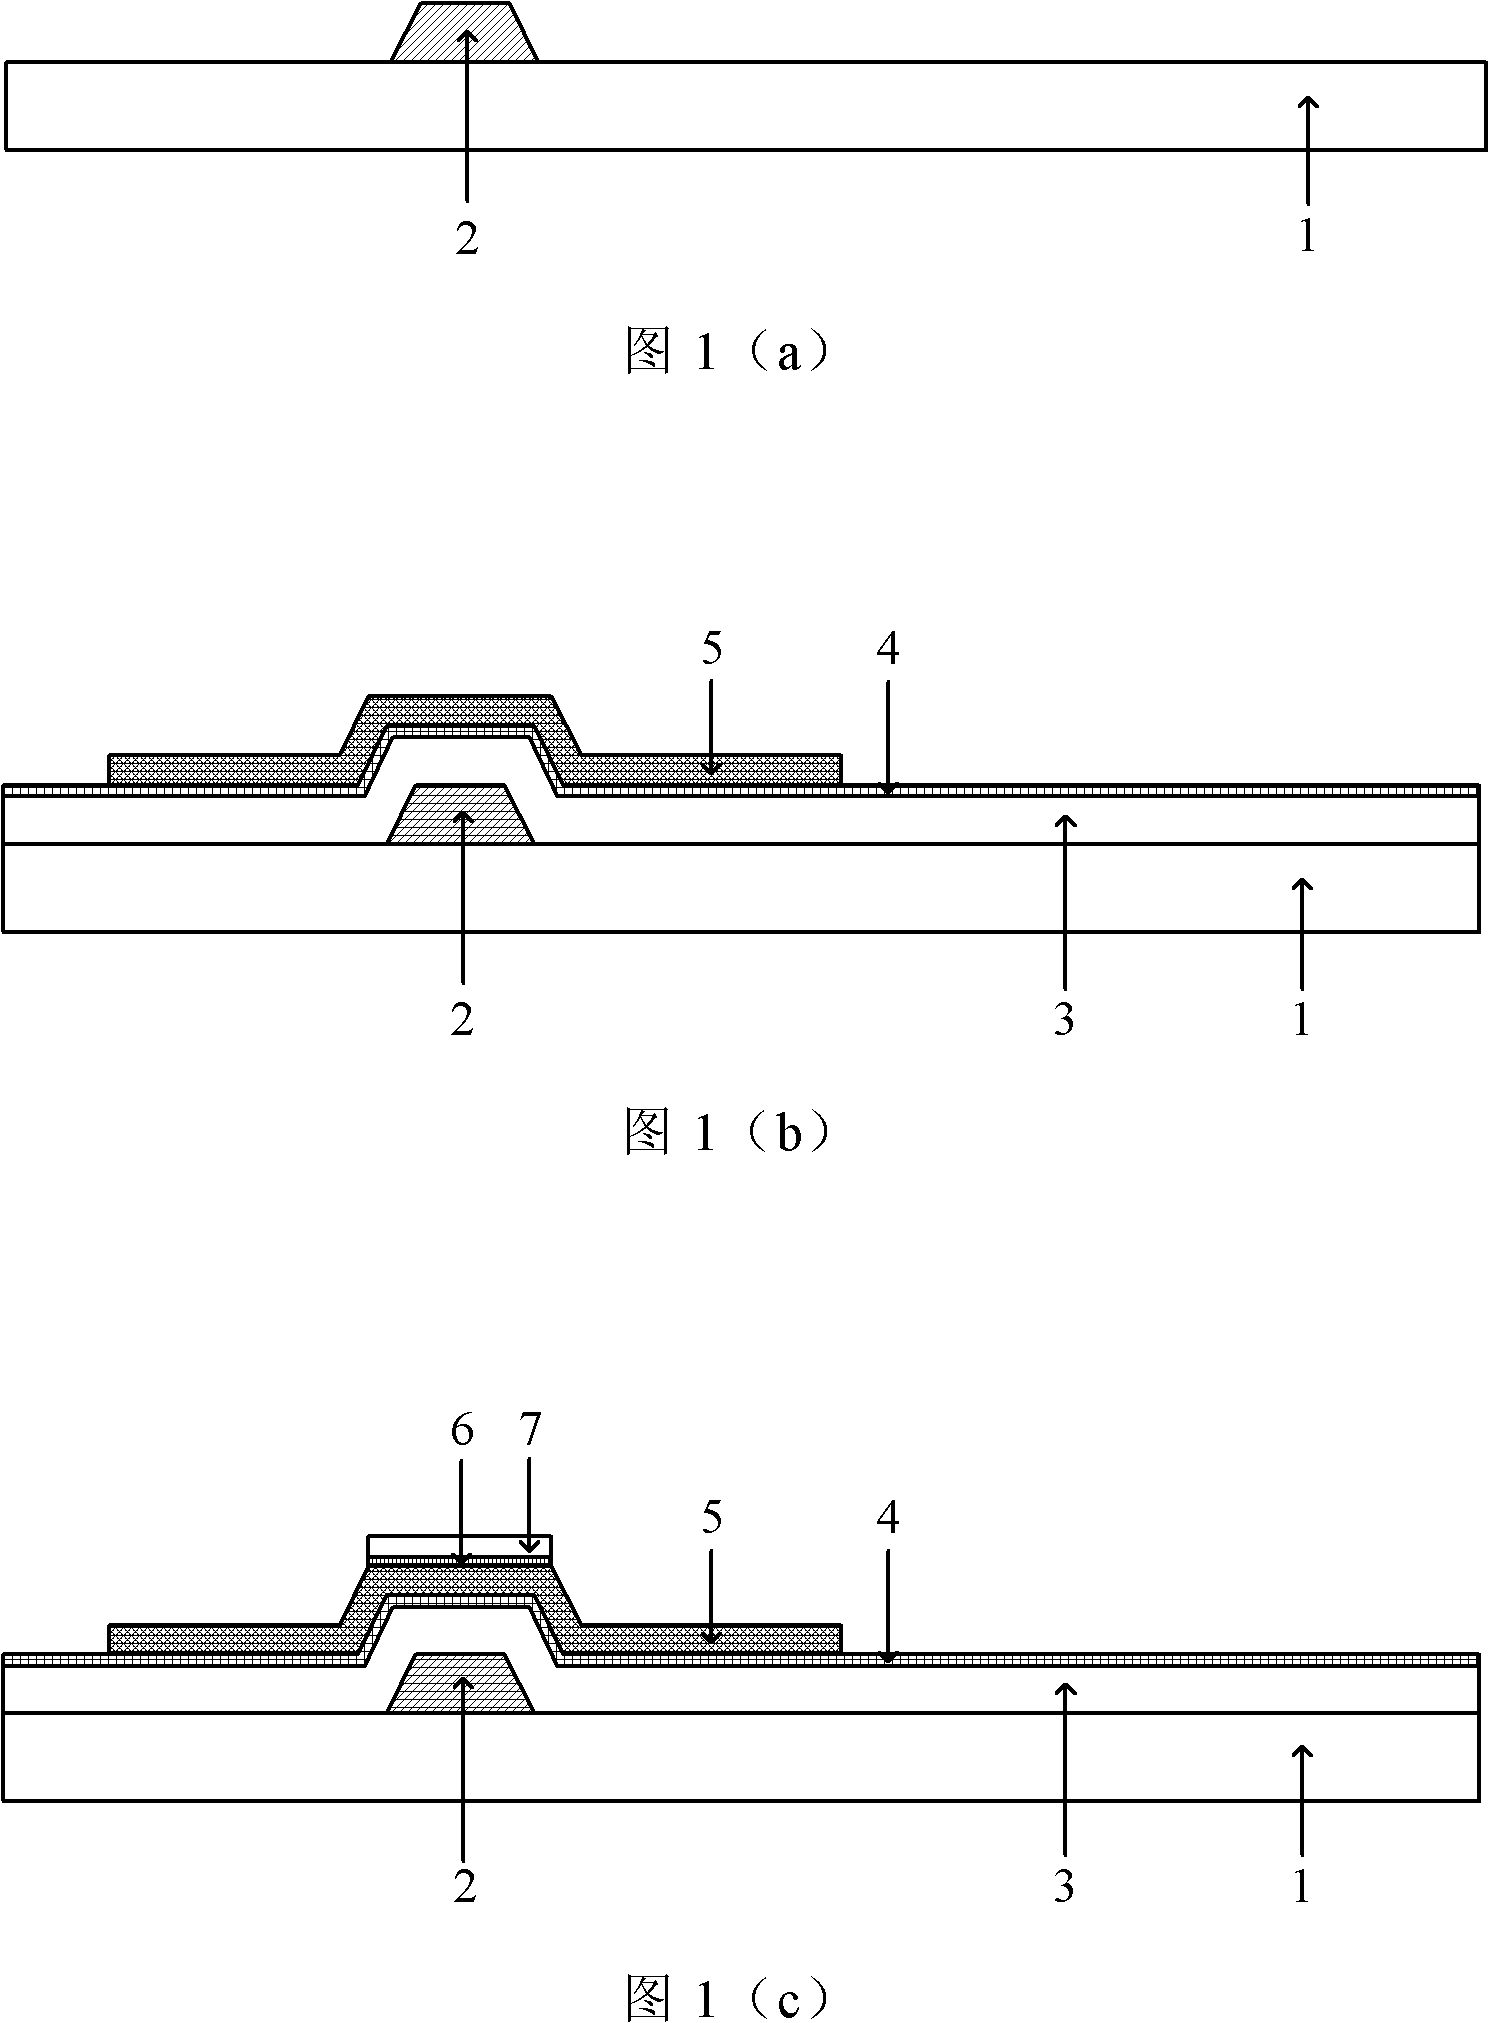 TFT (thin film transistor) array substrate